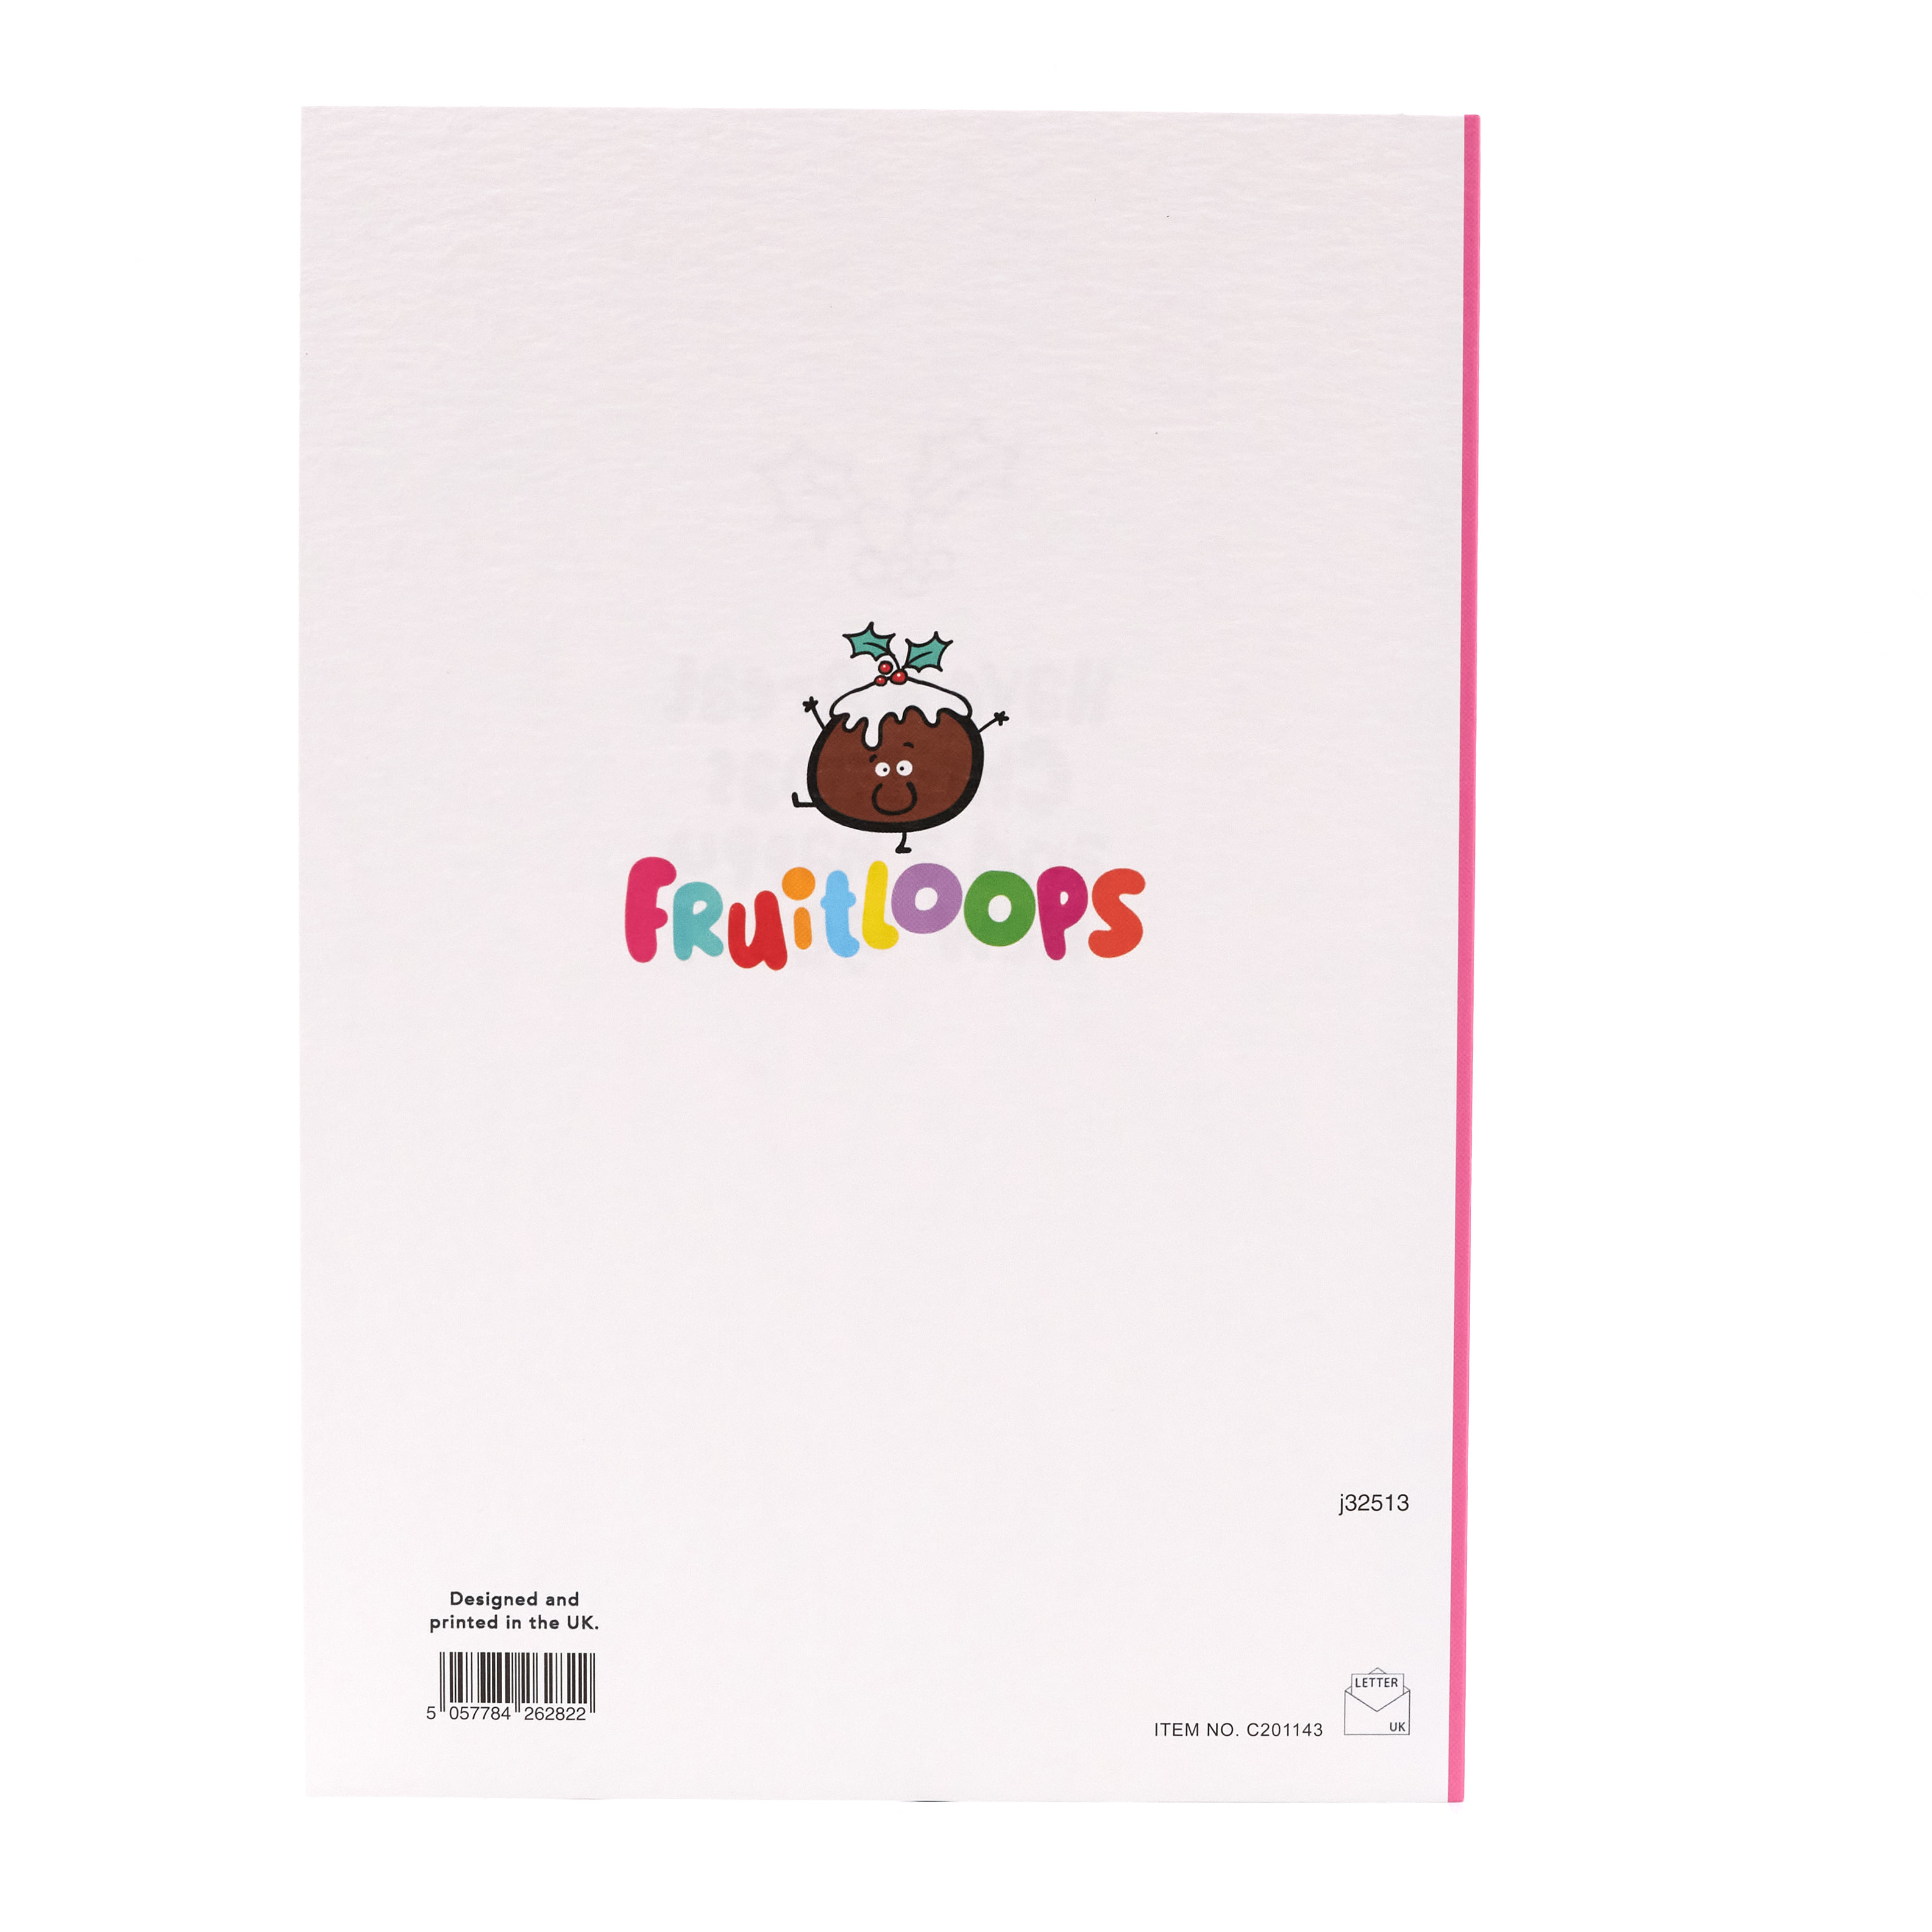 Fruitloops Christmas Card - Granddaughter, Star All Year Round